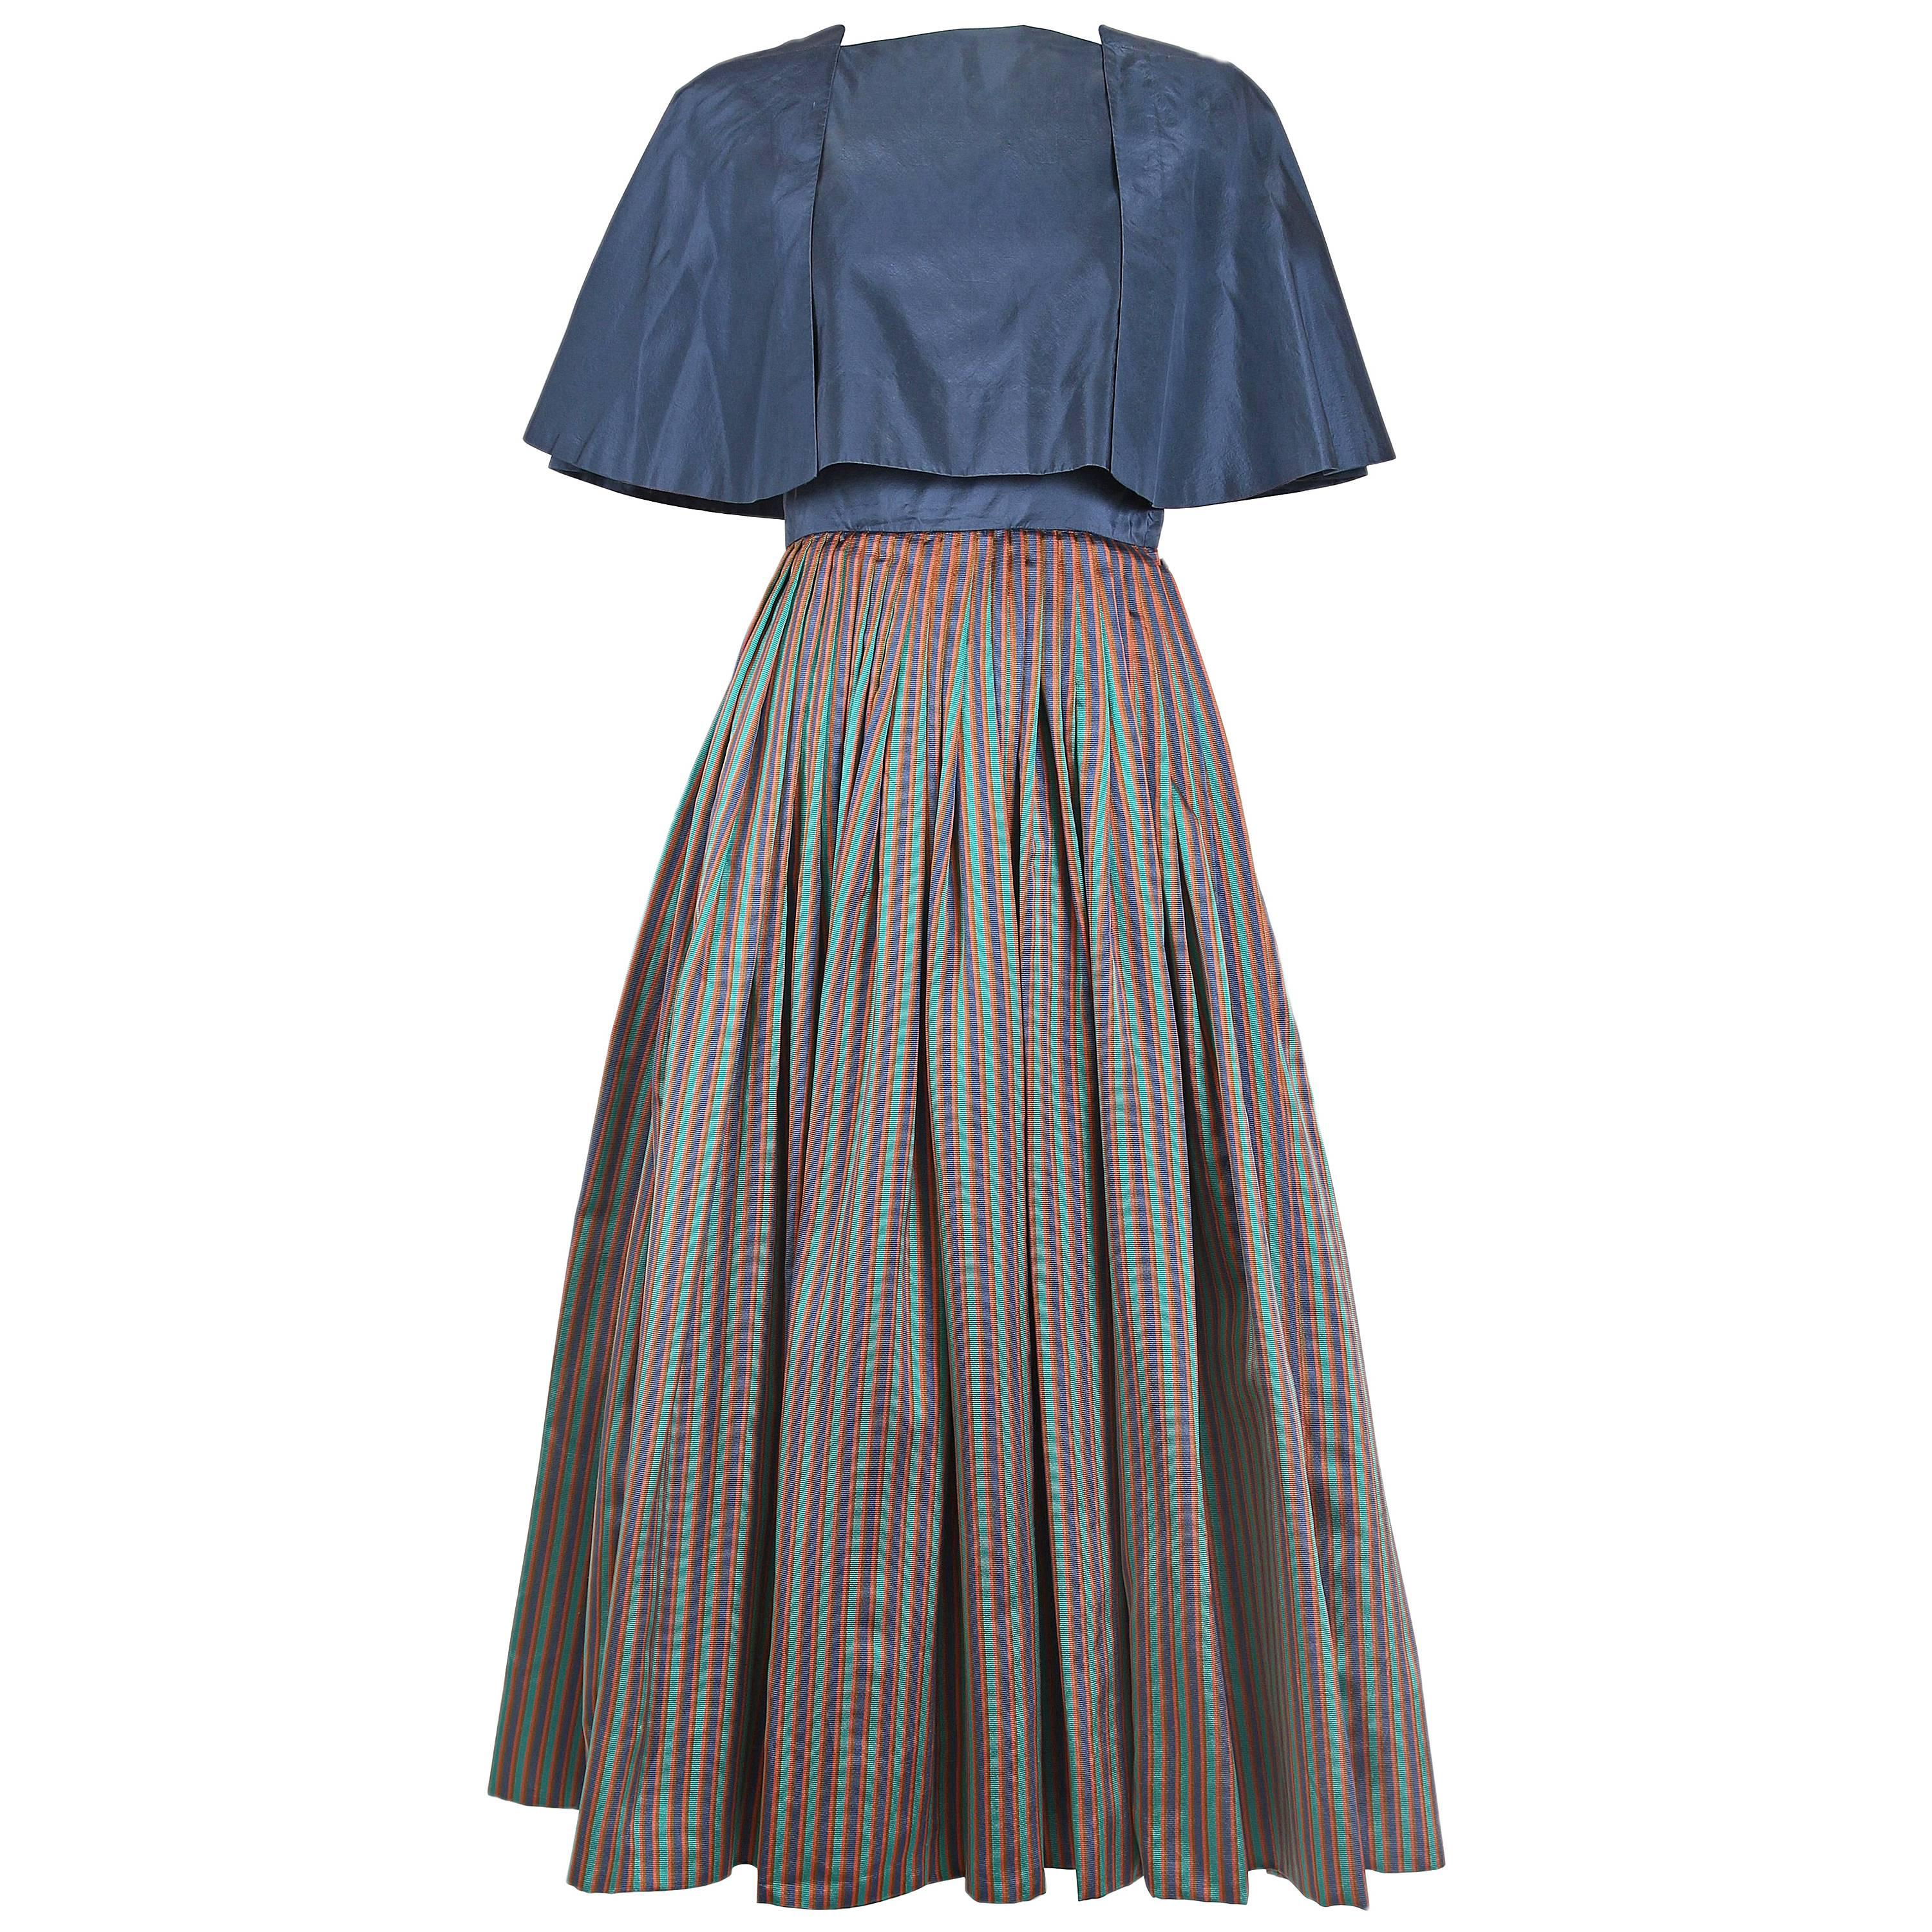 1983 Madame Gres haute couture cocktail dress featuring a blue silk taffeta bodice w/thin spaghetti straps and a voluminous/pleated silk skirt w/blue, green, orange, and brown vertical stripes. Skirt is lined at the interior with blue silk taffeta